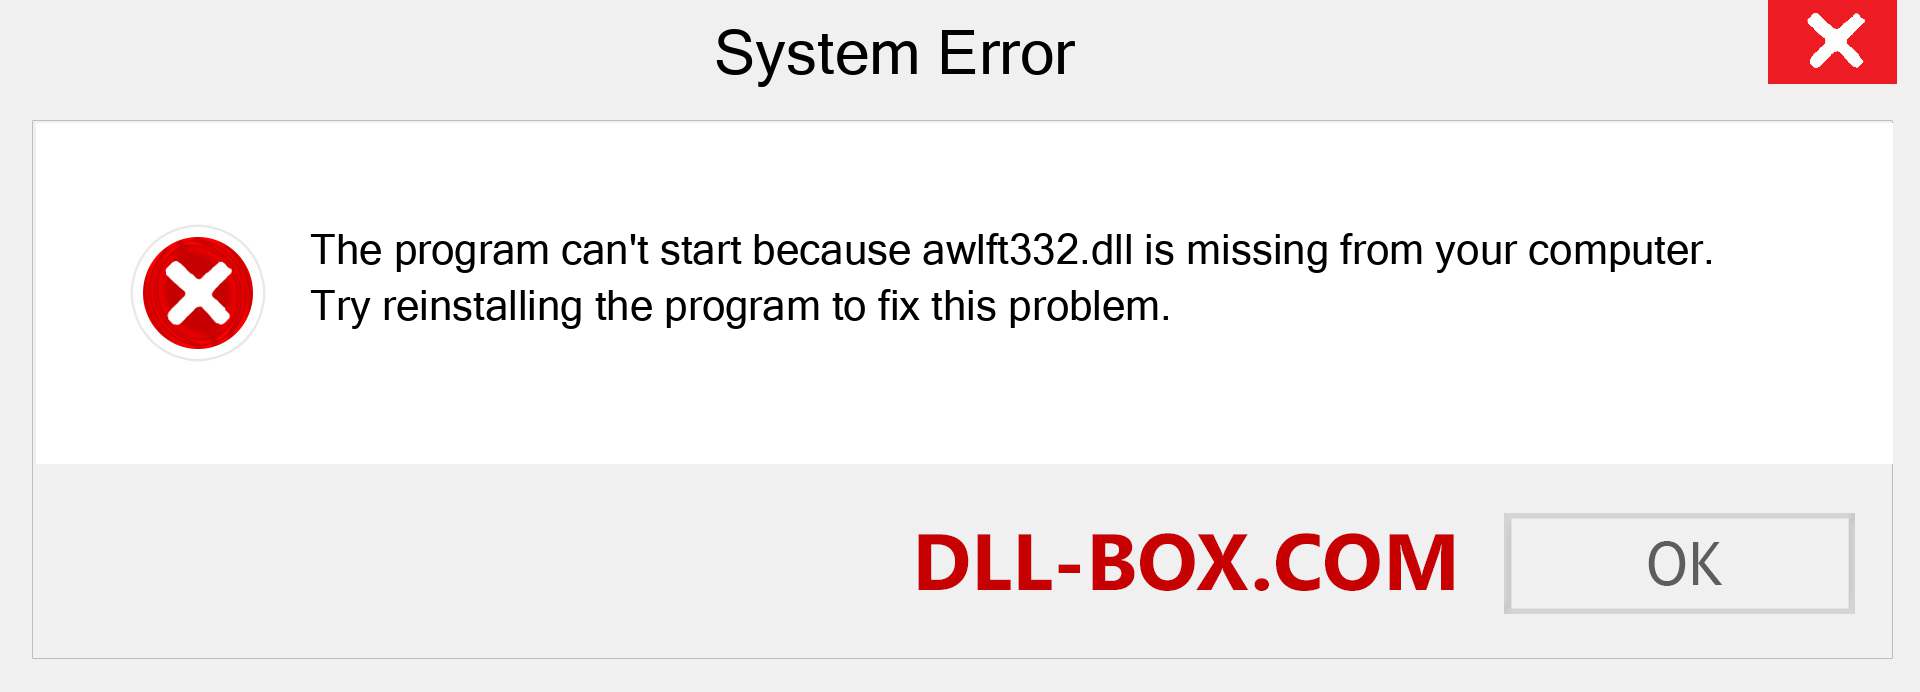  awlft332.dll file is missing?. Download for Windows 7, 8, 10 - Fix  awlft332 dll Missing Error on Windows, photos, images